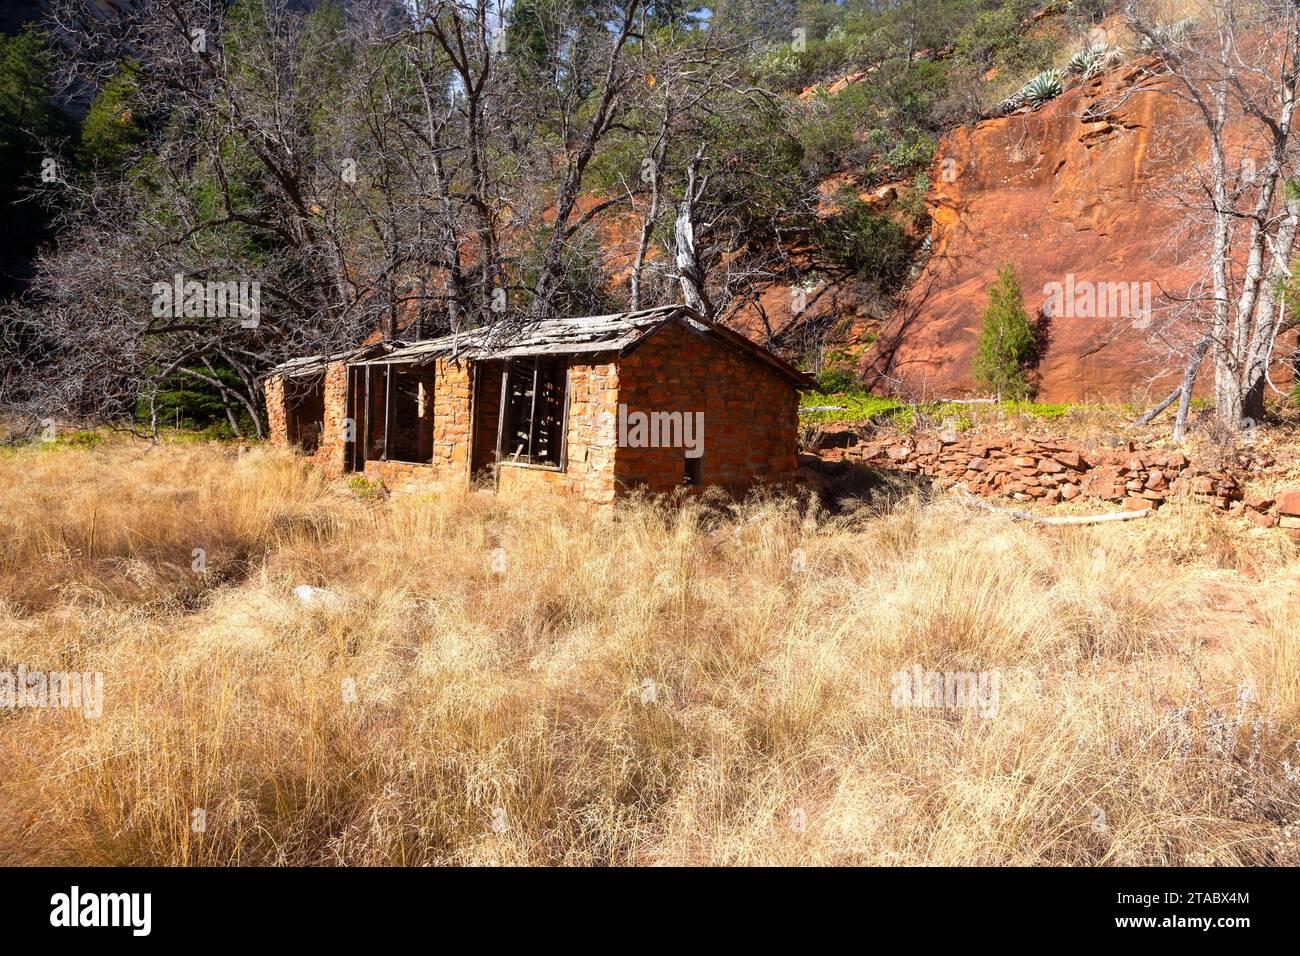 America Settler Legacy, Historic Sedona Mayhew Lodge Old Stone Decaying Ruins Side View. Oak Creek Canyon West Fork, Arizona Southwest US State Park Banque D'Images